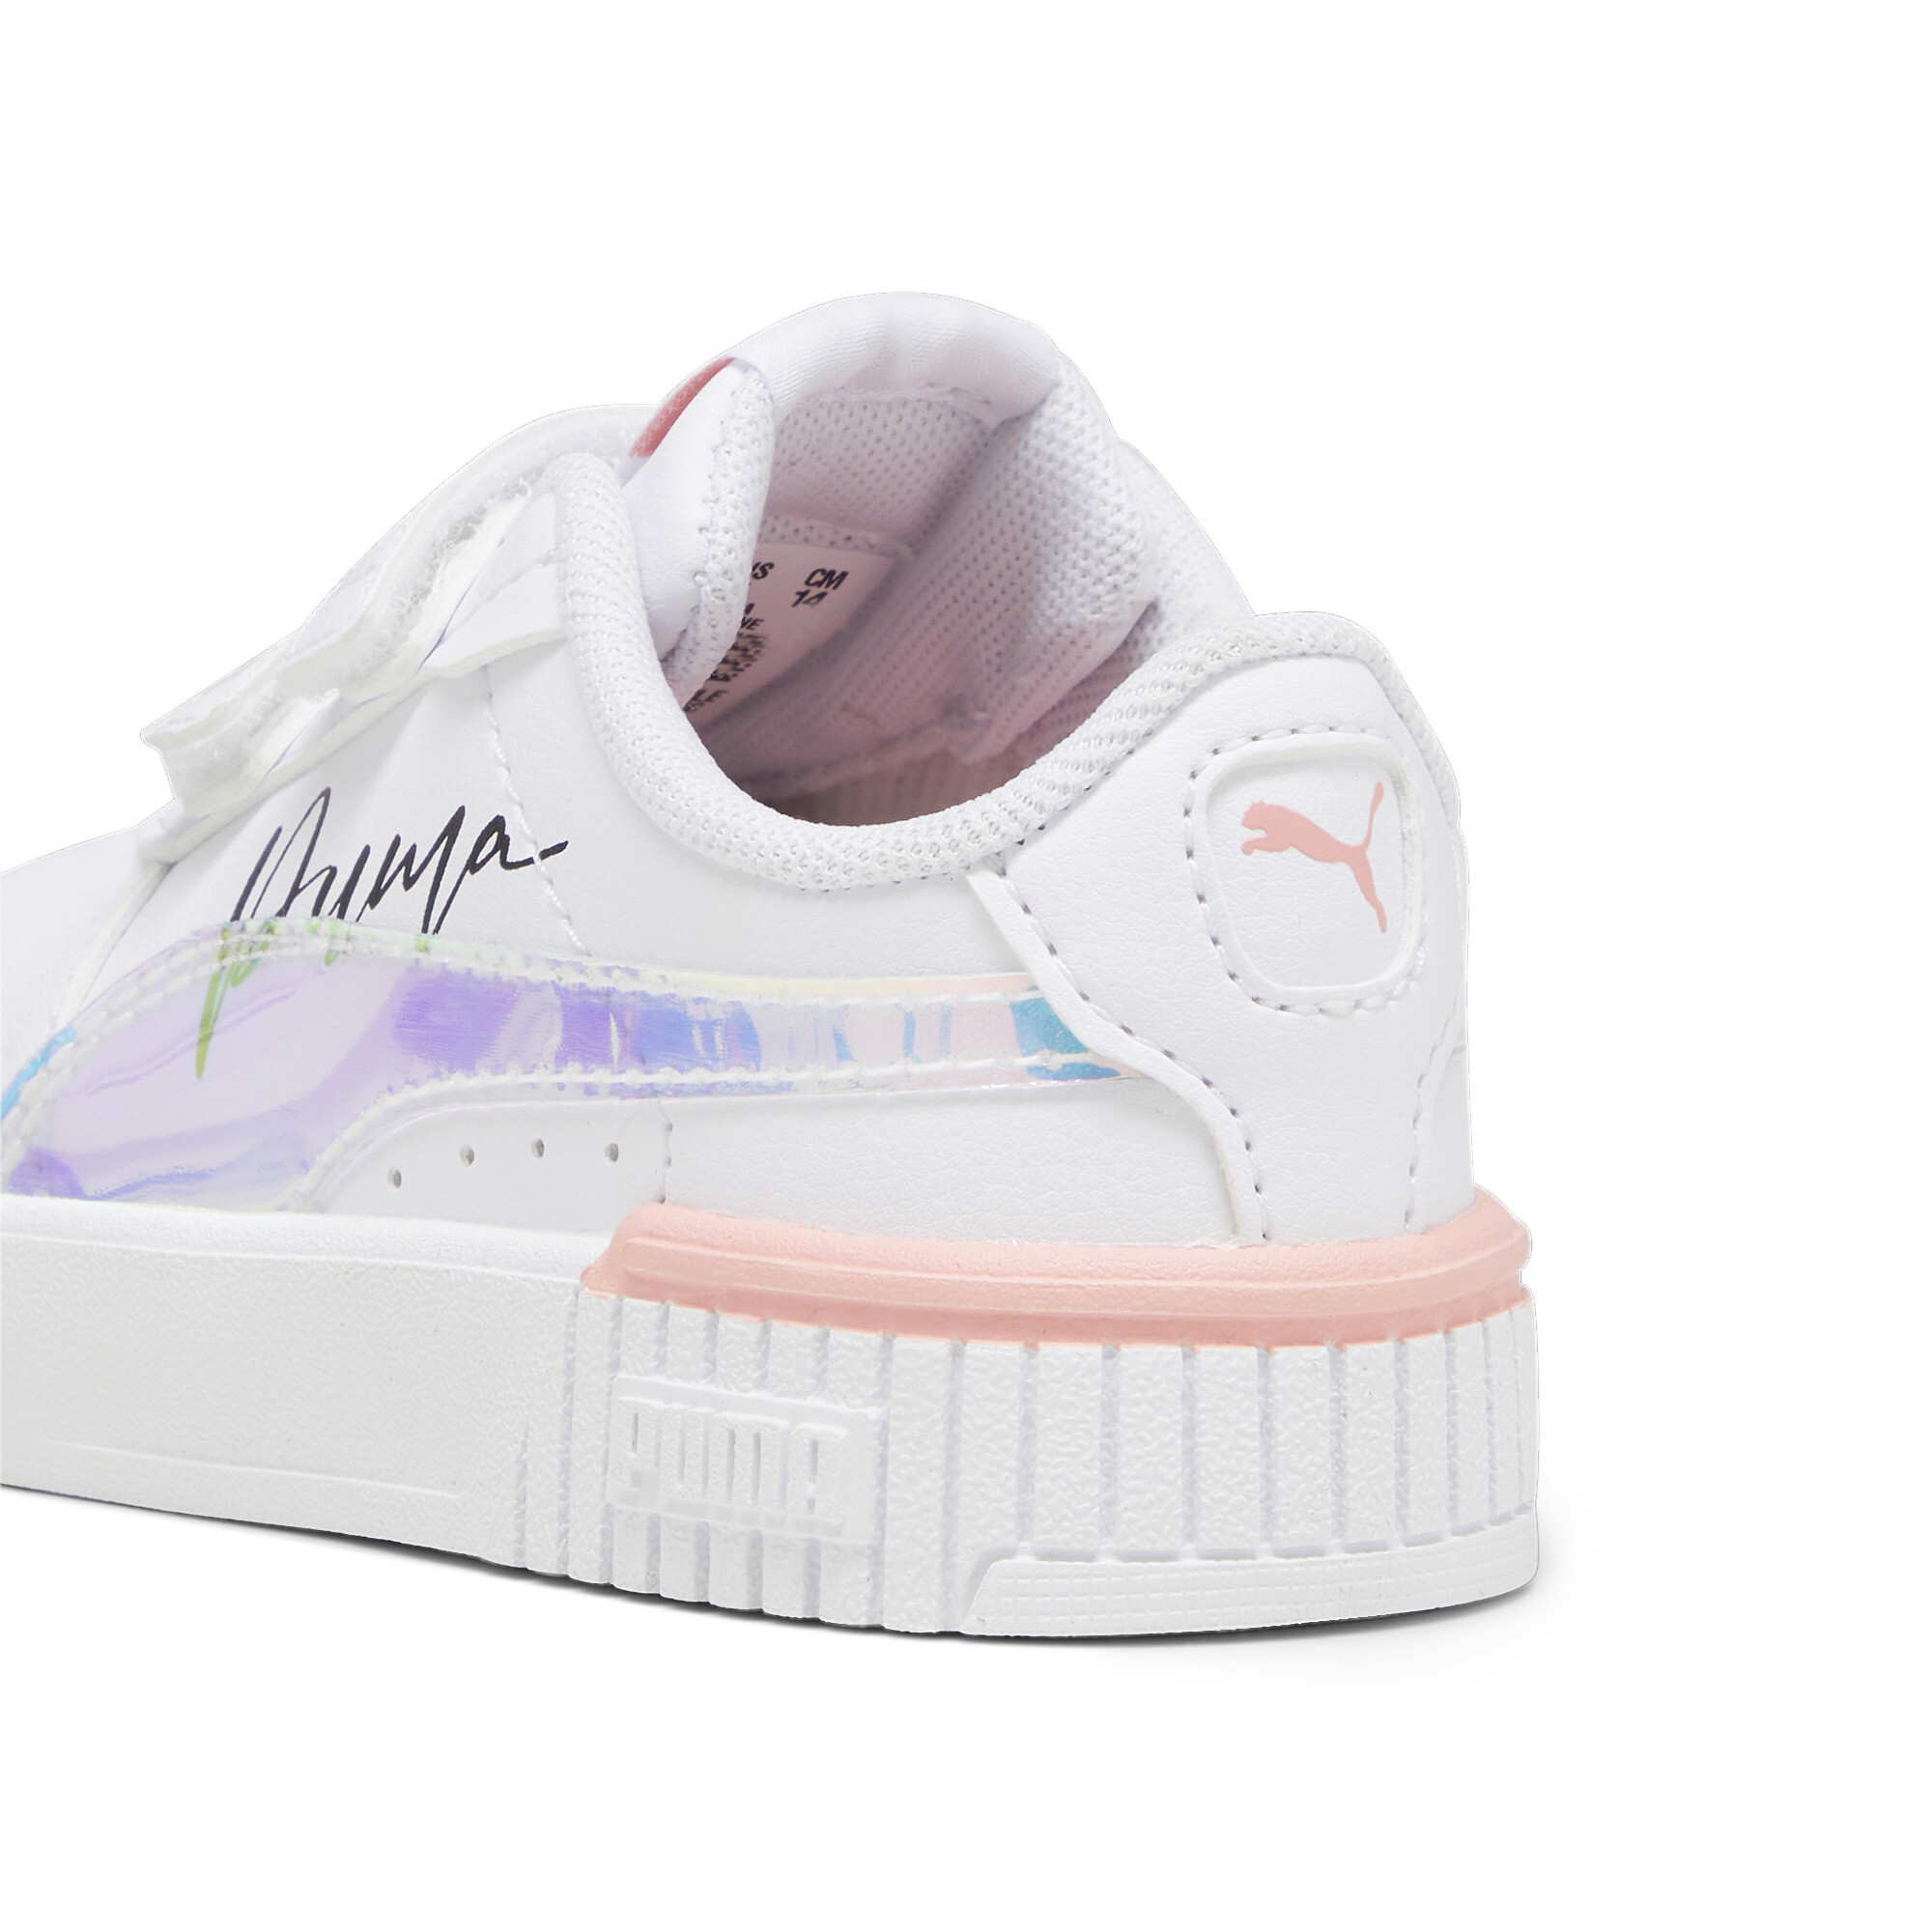 Women's Puma Carina 2.0 Crystal Wing Sneakers Baby, White, Size 23, Shoes